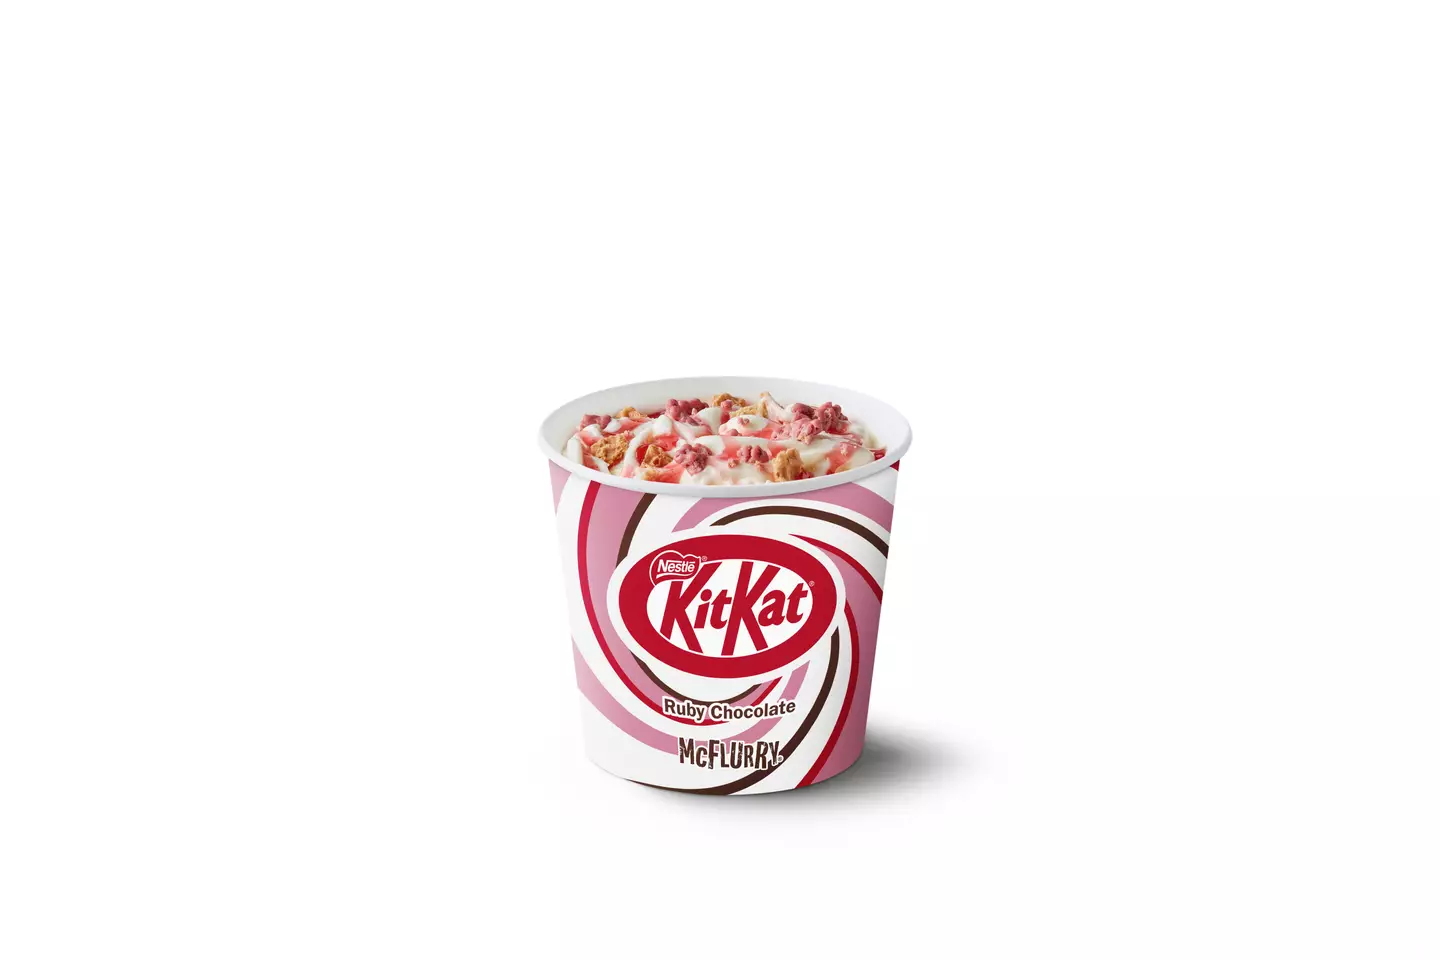 The KitKat® Ruby Chocolate McFlurry will be launching on the menu soon.